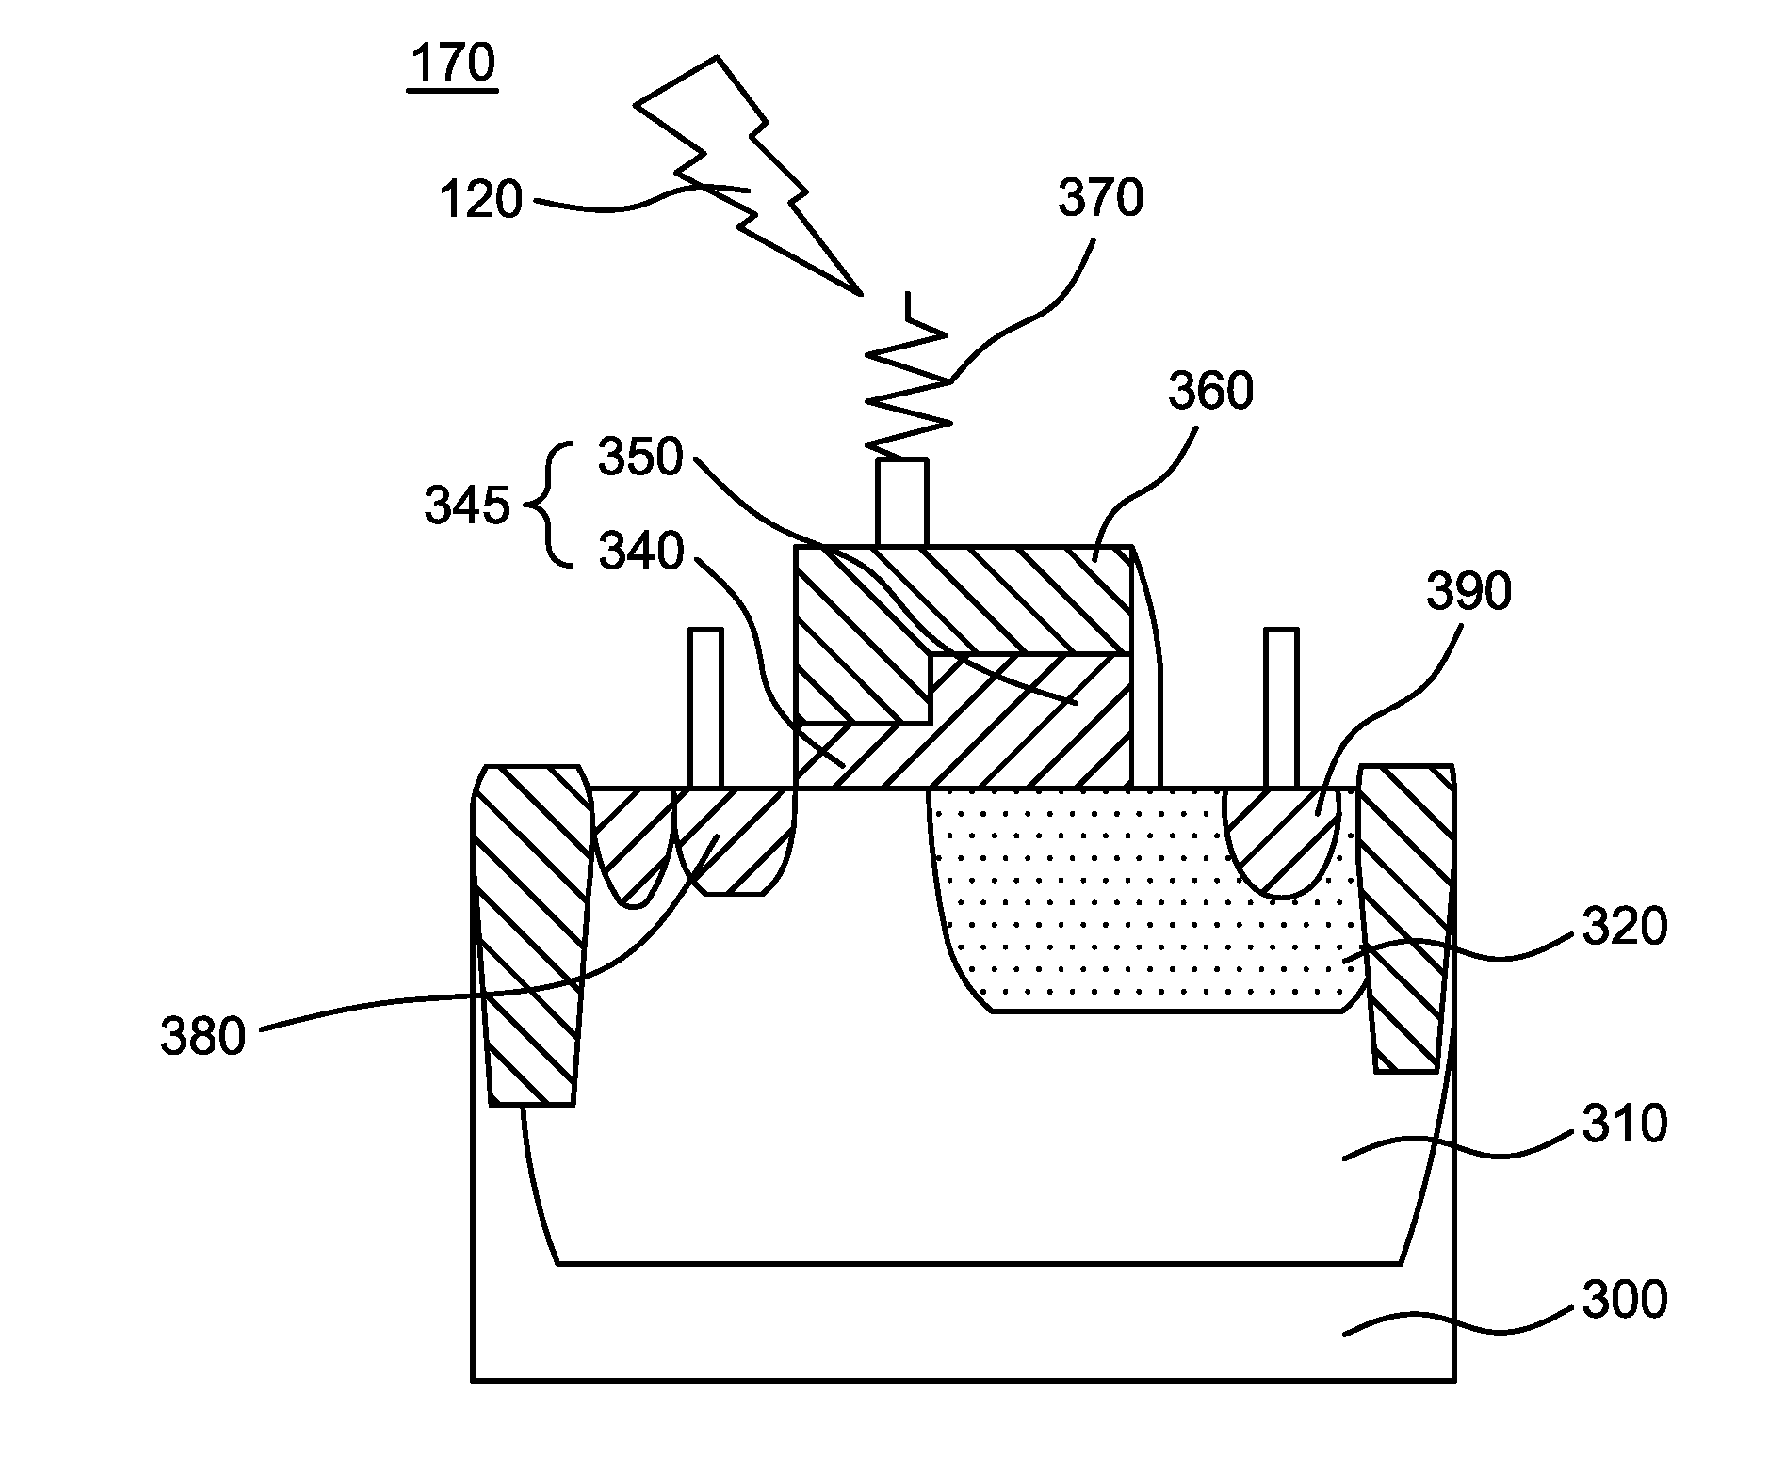 Semiconductor device in a level shifter with electrostatic discharge (ESD) protection circuit and semiconductor chip